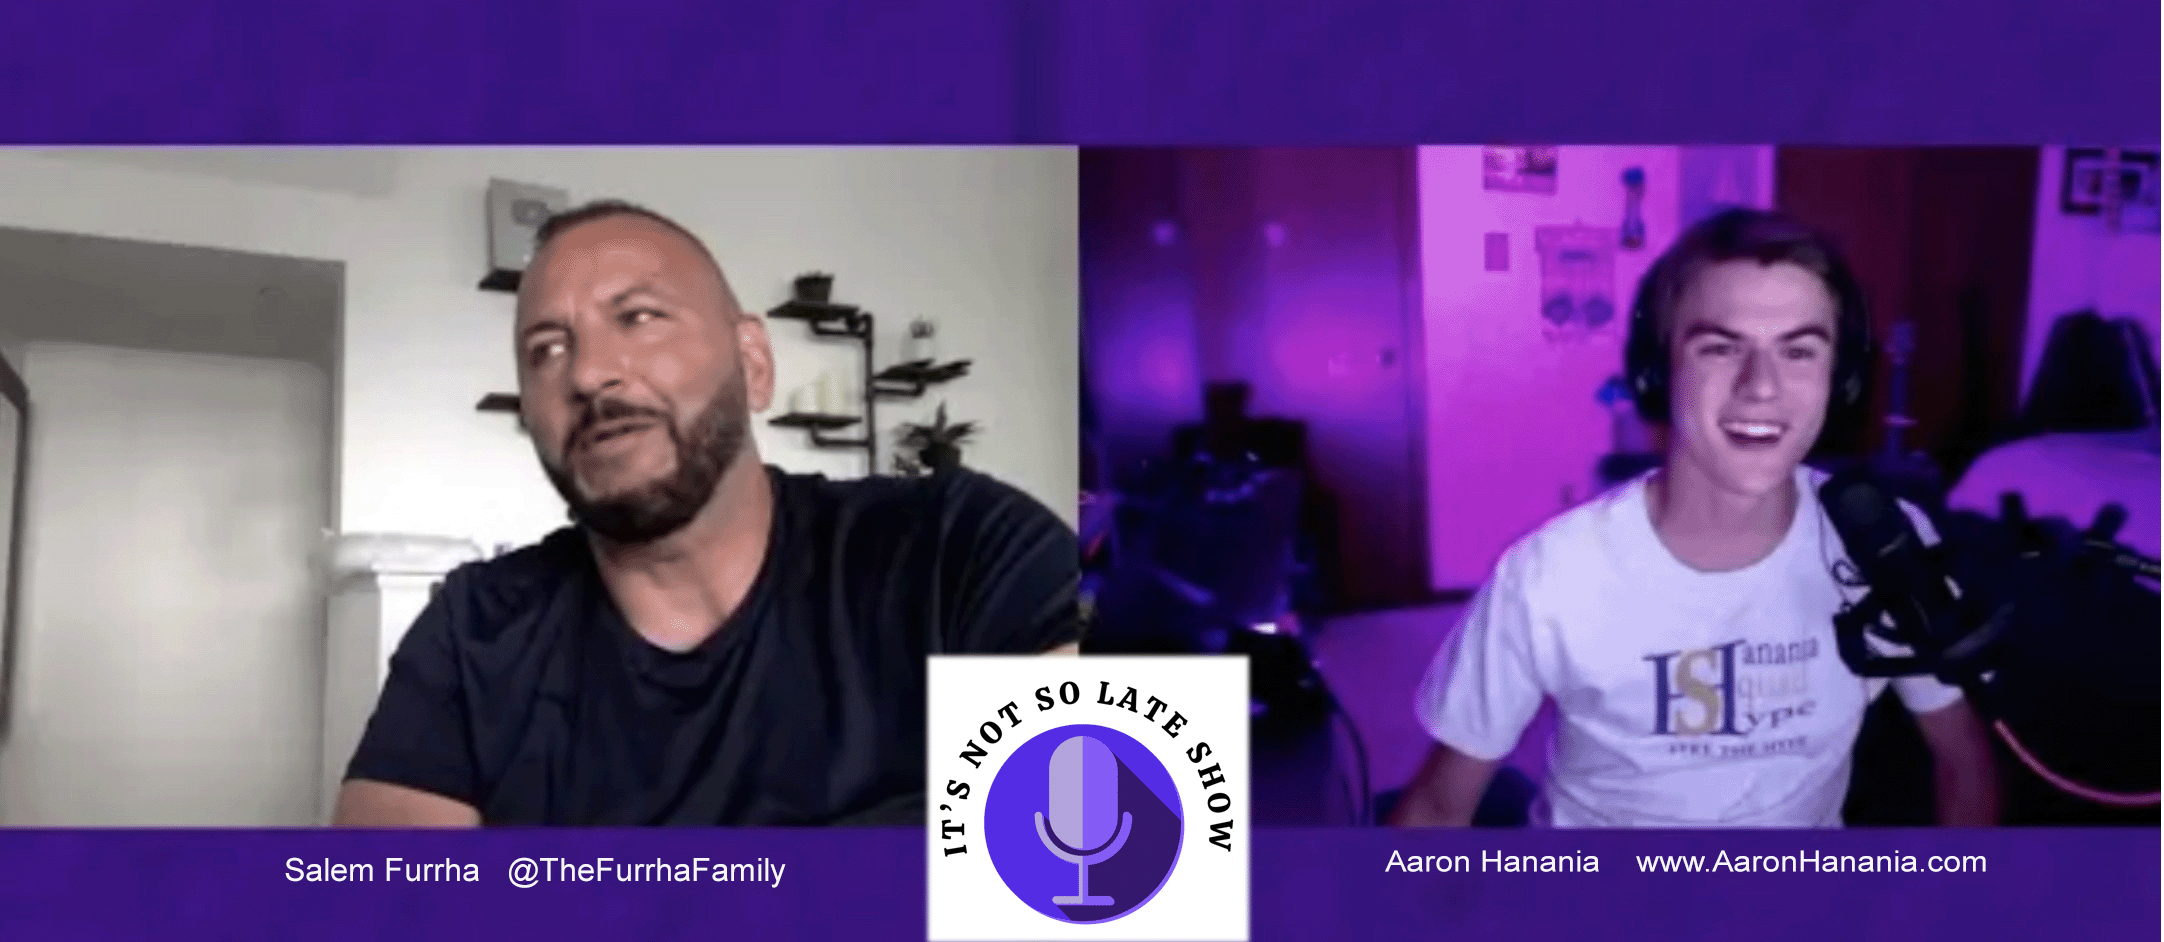 It's Not So Late Show interview with guest and social media phenom Salem Furrha with Aaron Hanania.